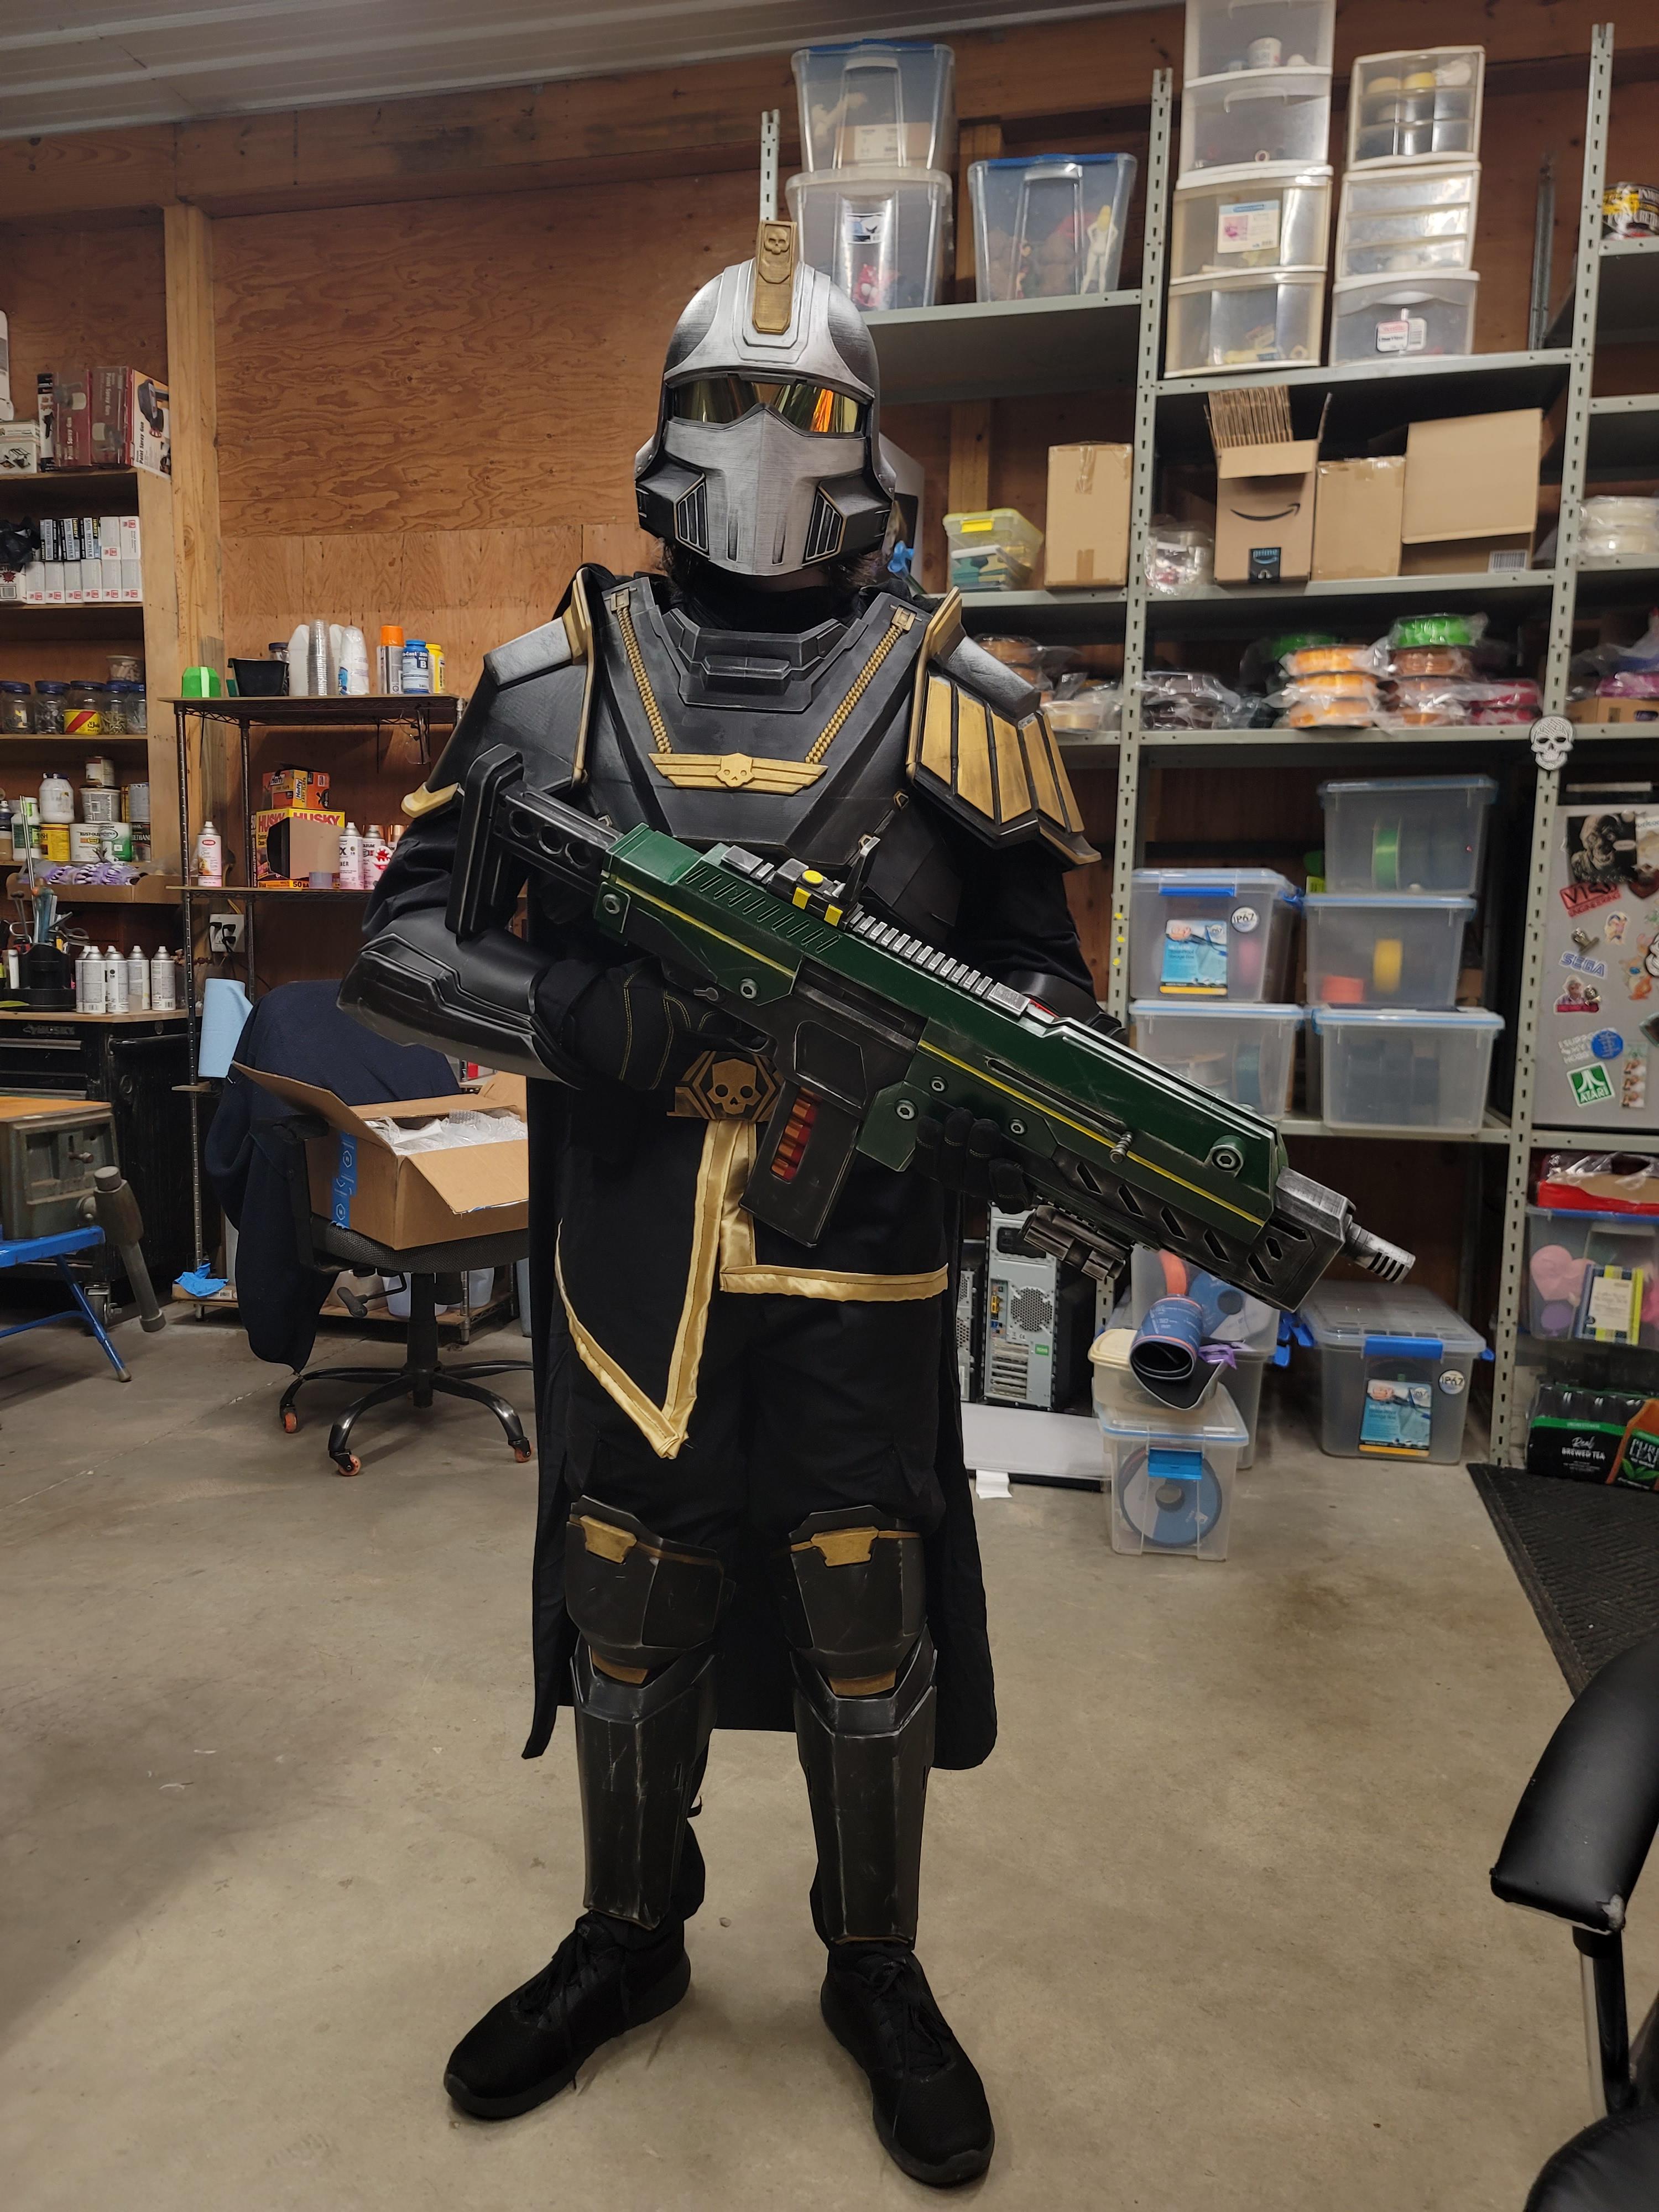 Helldivers 2 Armor - Hero of the Federation - 3D Print Files - Great armor set. Got them printed just in time for my son and his friends convention this weekend. Files are easy to print and put together. - 3d model